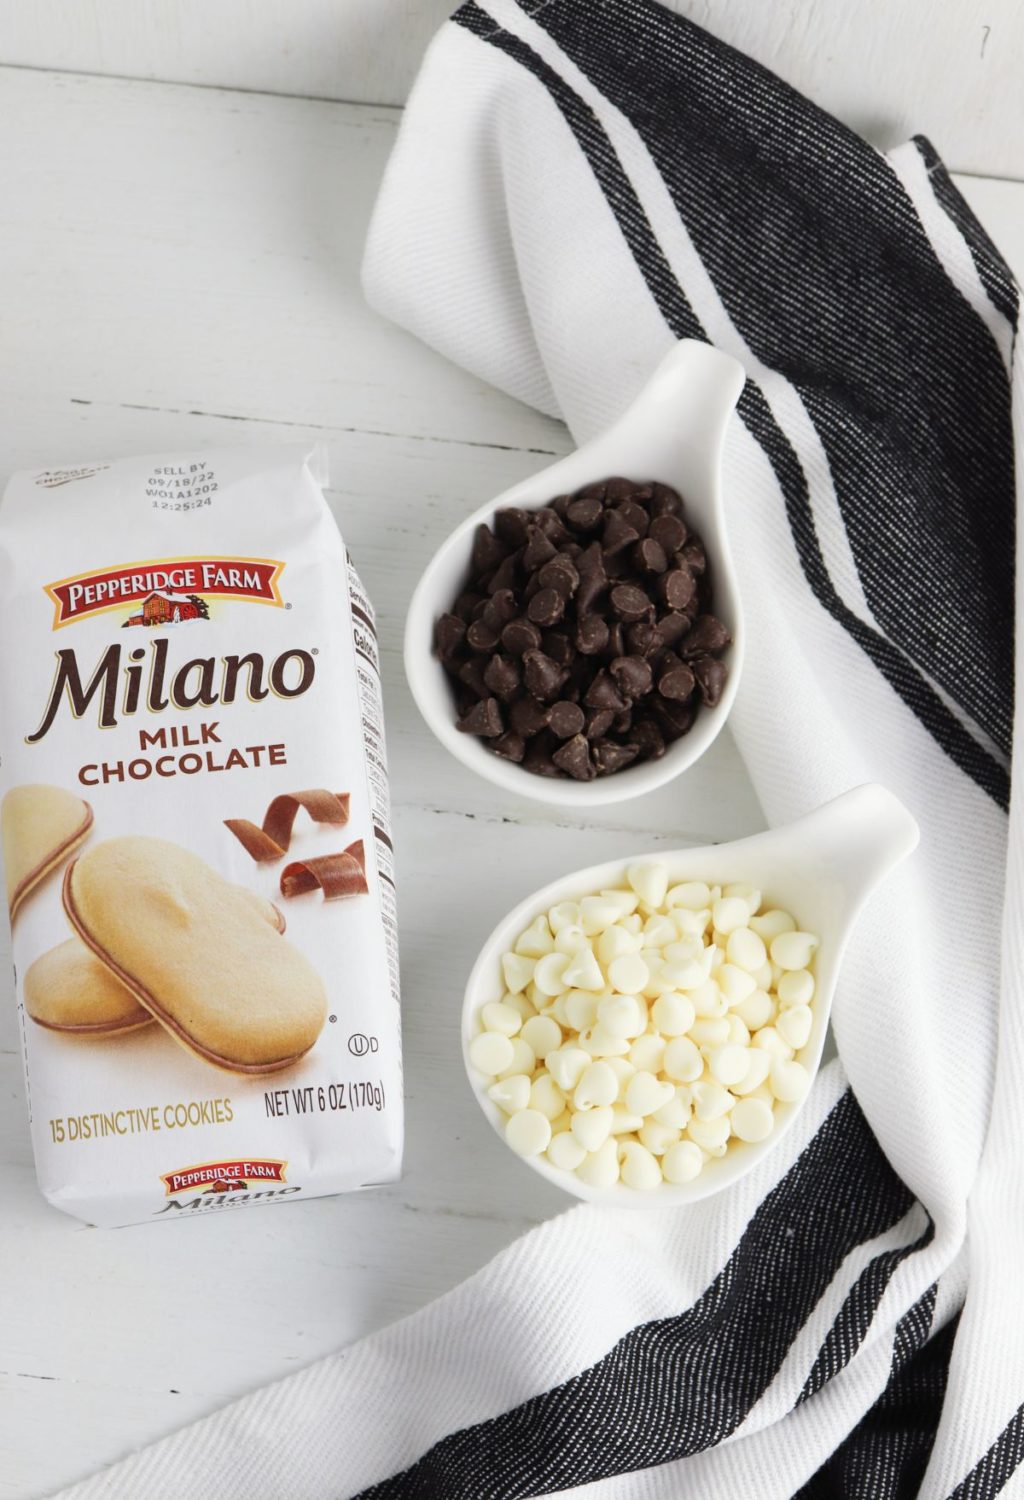 A bowl of chocolate chips and a package of milano chocolate chips.